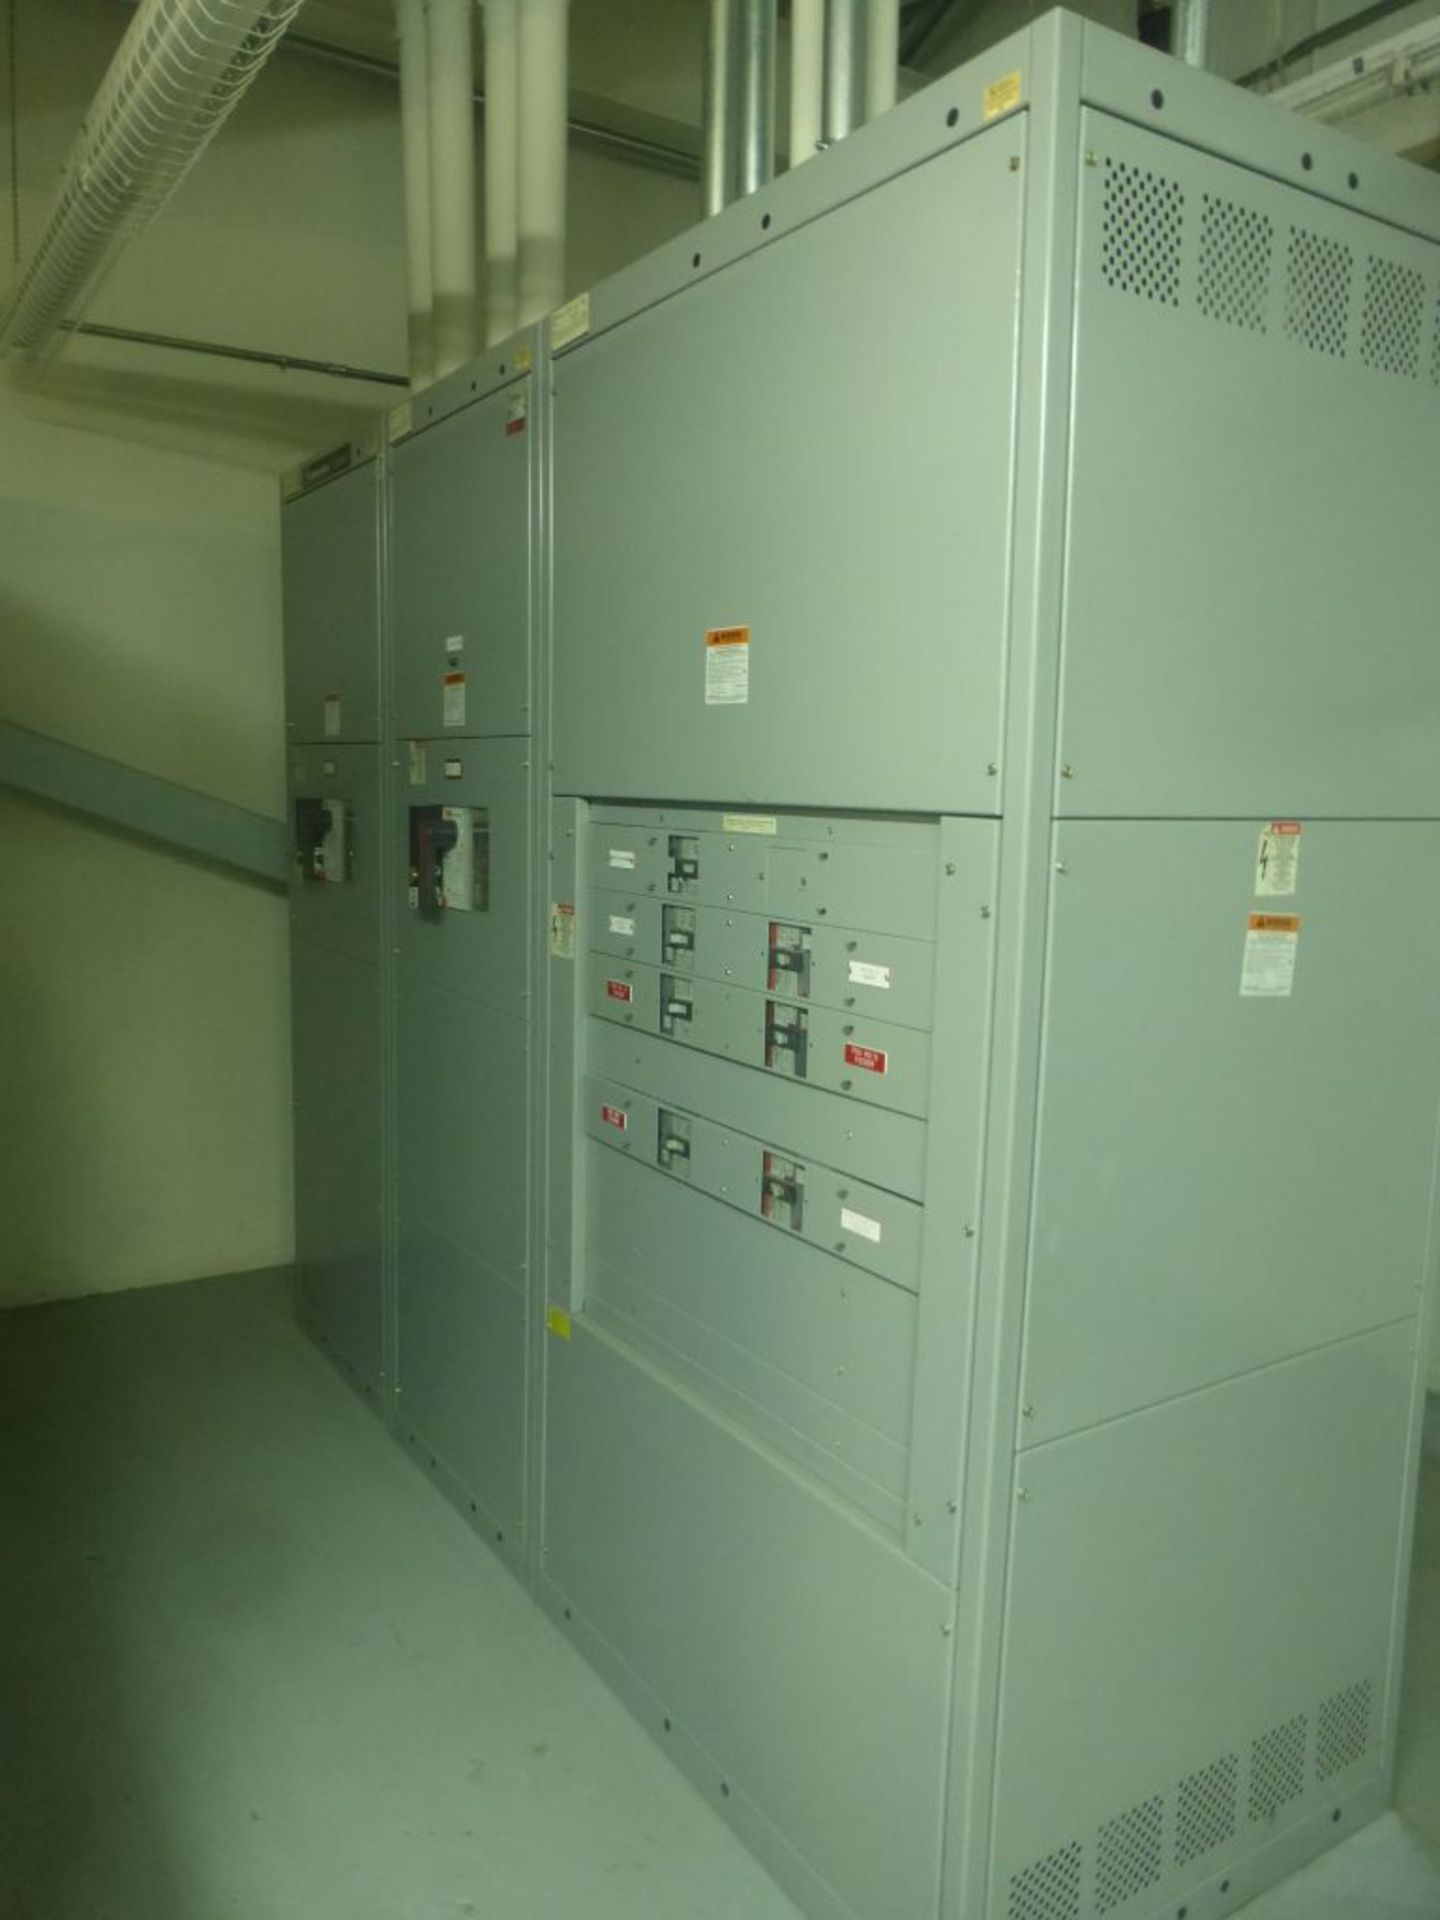 GE Spectra Series Switchboard